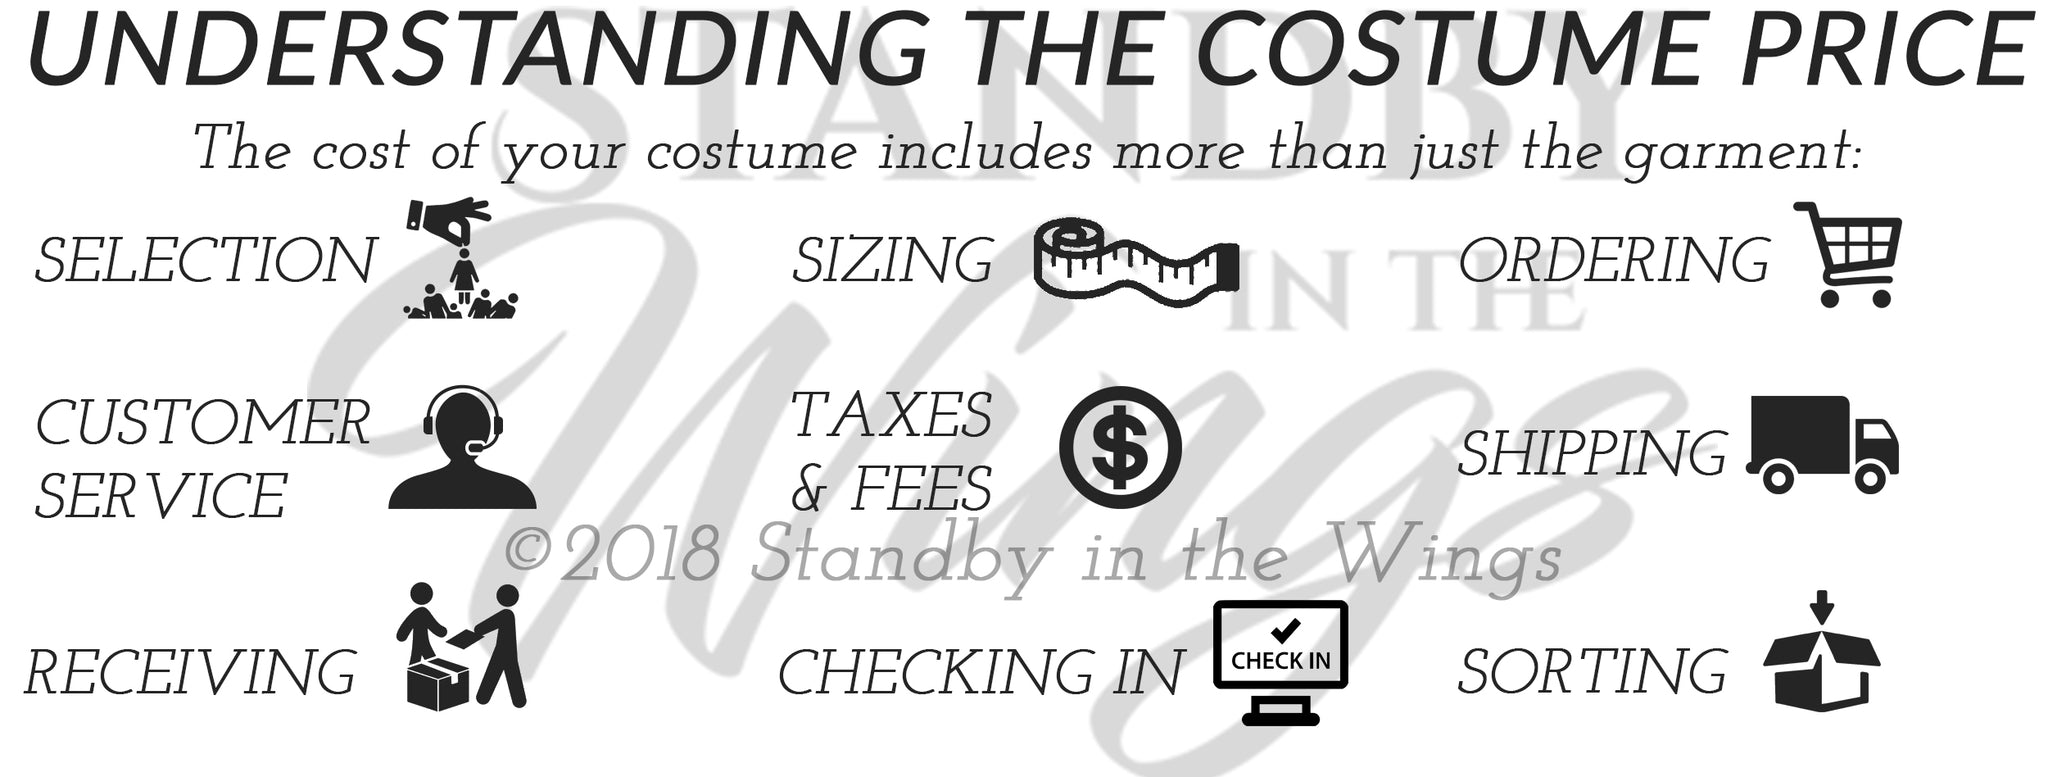 Costume Value Graphic (without Tights)